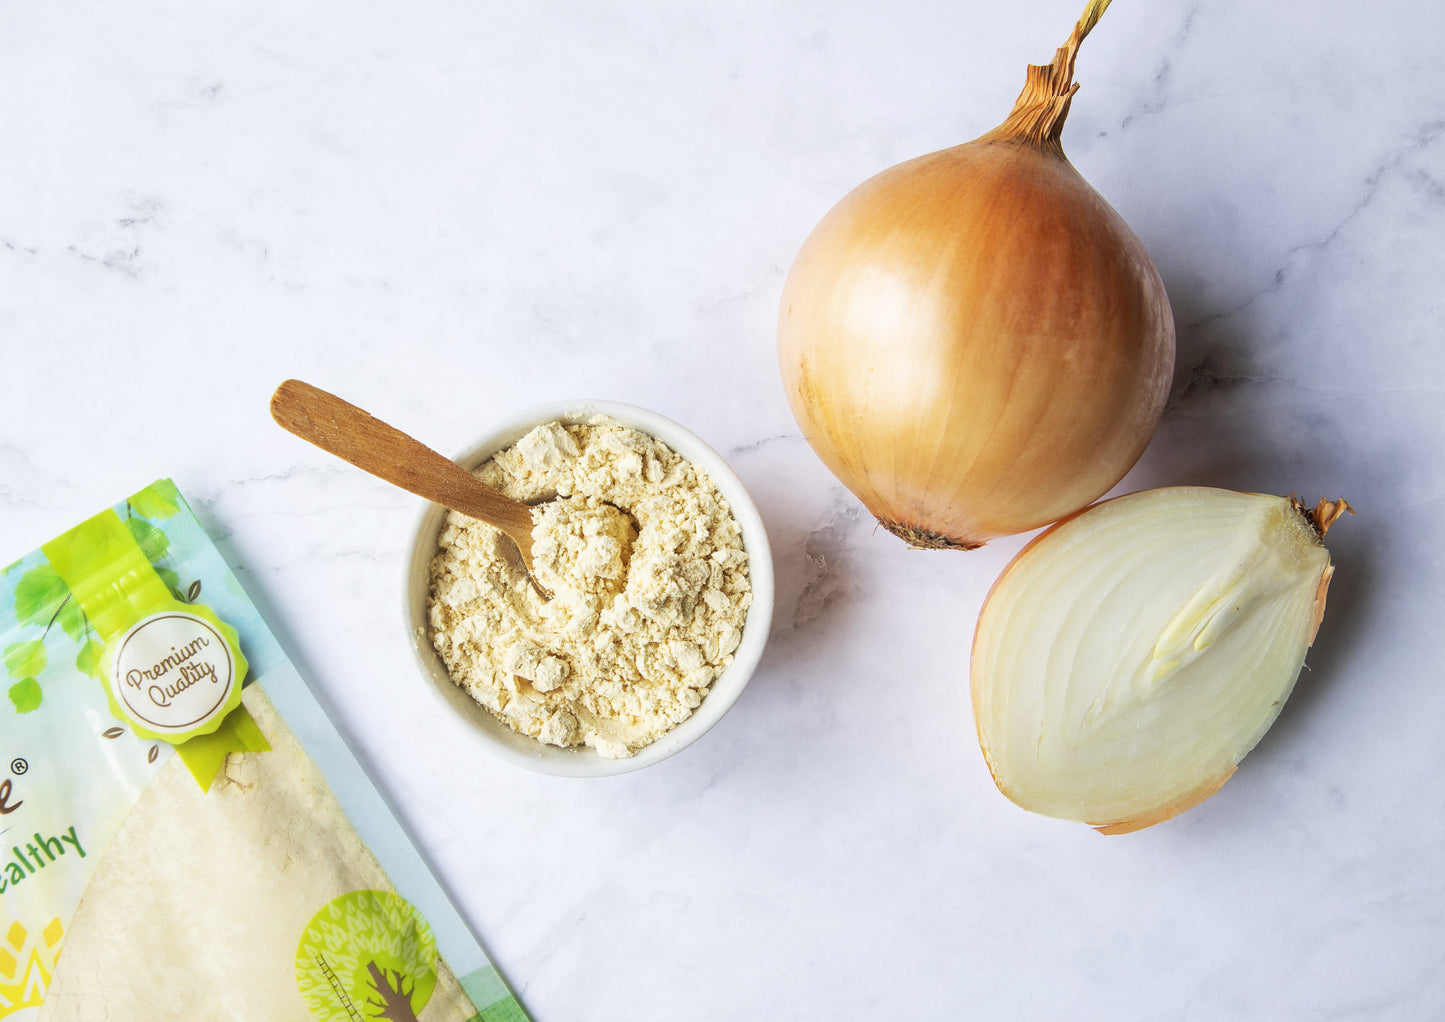 Onion Powder – Finely Ground Dried Onions, Pure, Vegan, Bulk. Rich Onion Flavor. High in Vitamin C, Dietary Fiber. Great Seasoning for Cooking, and Baking. Perfect for Spice Blends